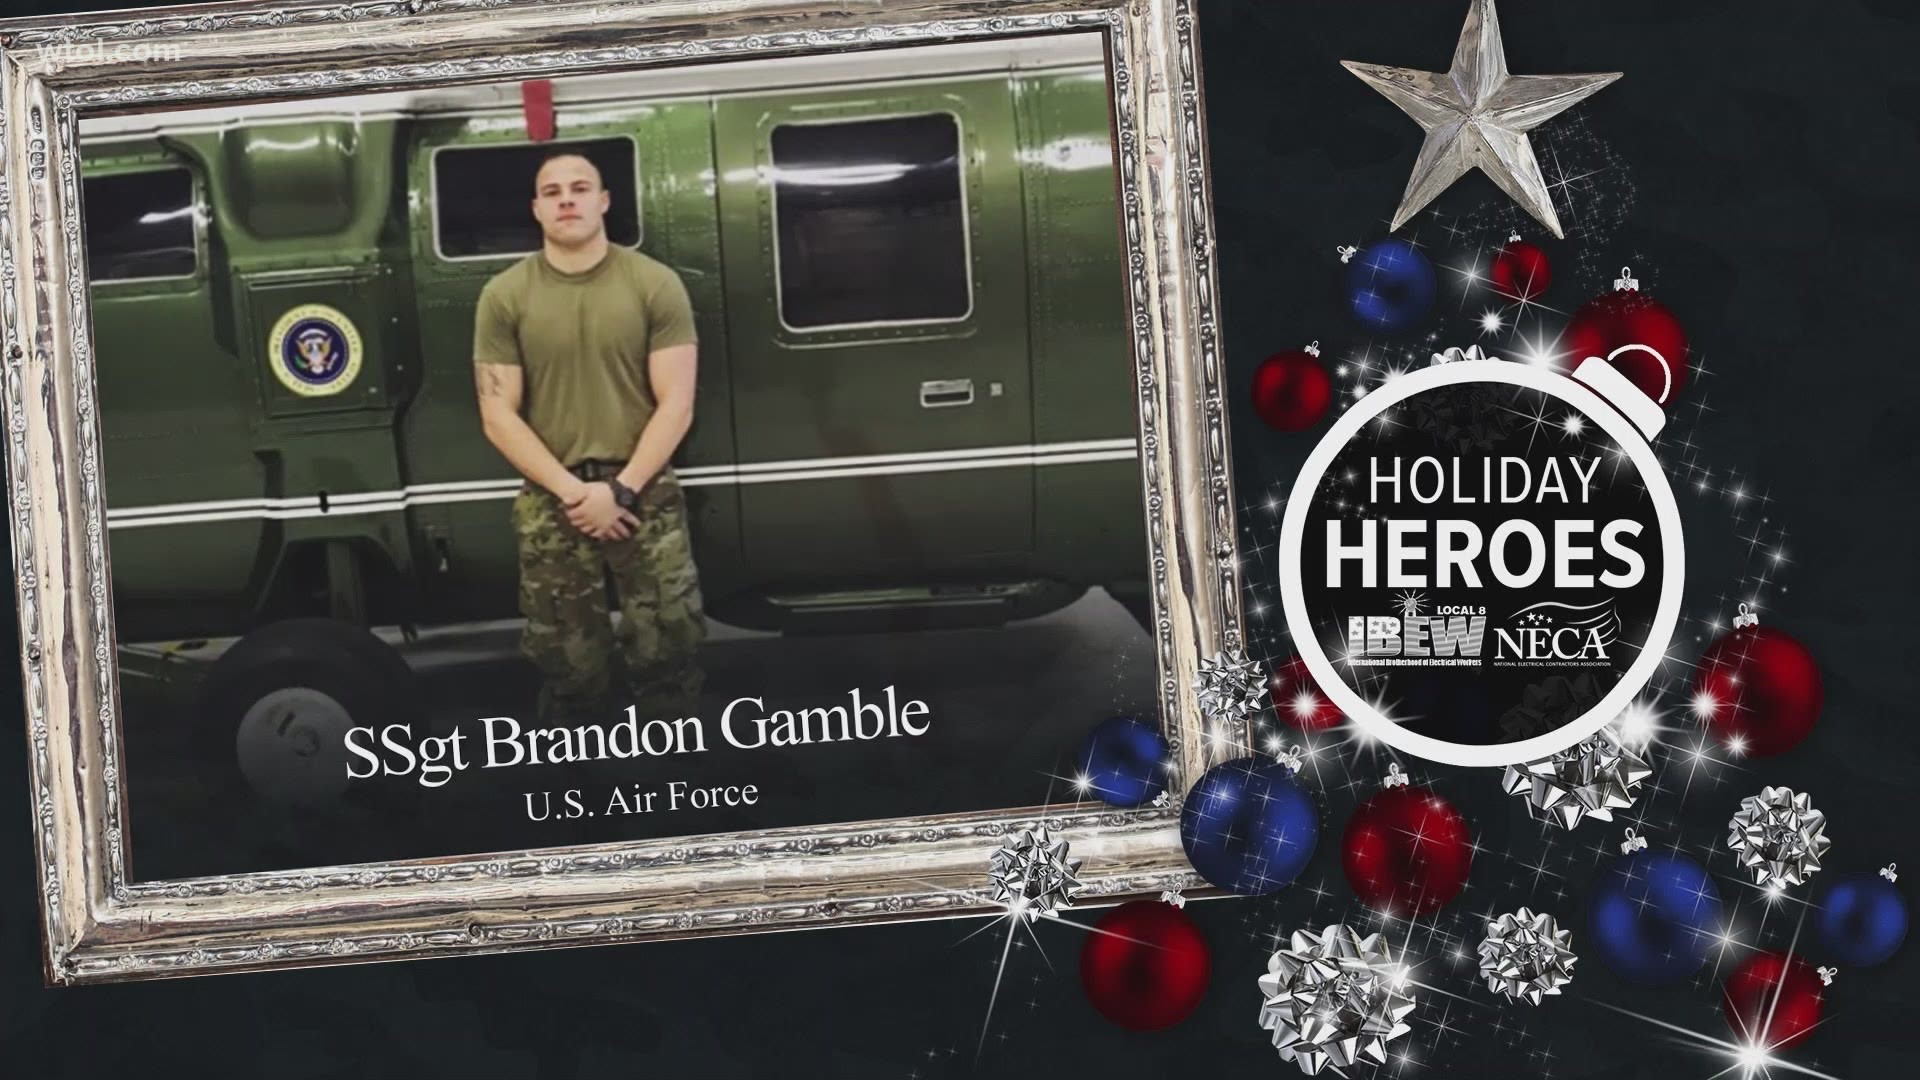 Let's take a moment to honor Monday's holiday hero, Brandon Gamble. Brandon graduated from Bedford High School and is a Staff Sergeant in the Air Force.